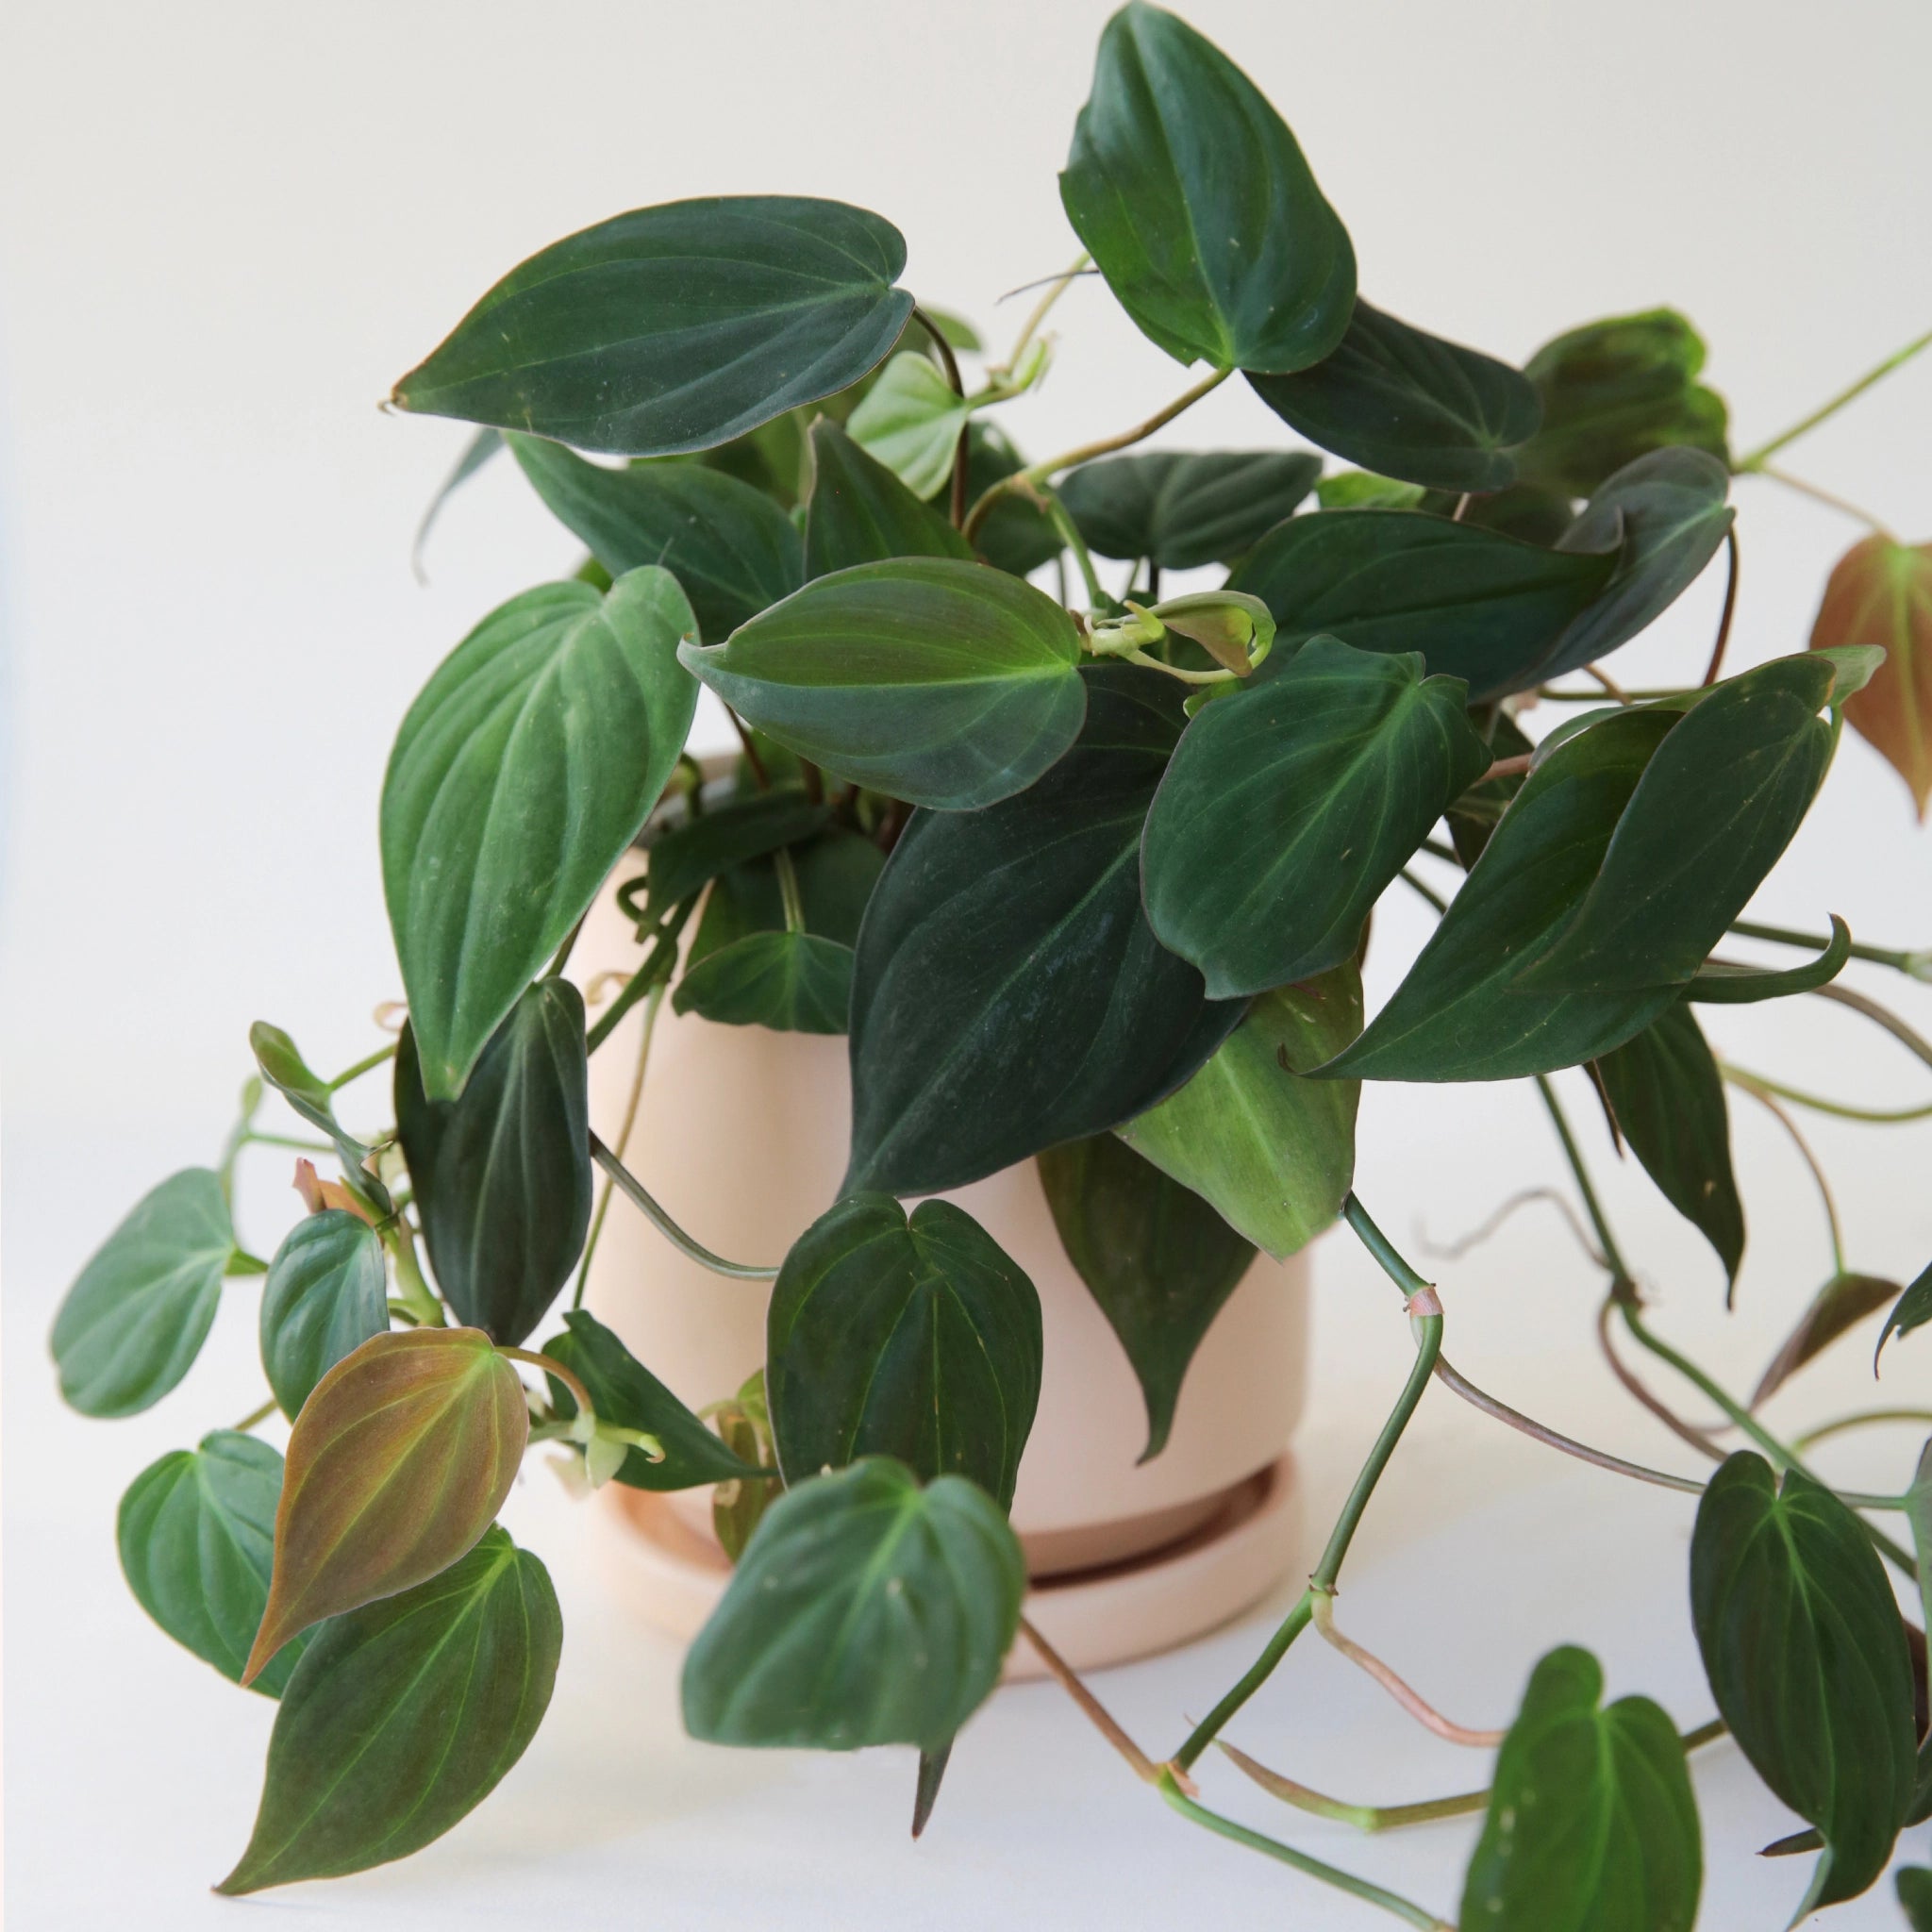 In front of a white background is a light pink circular pot. Inside the pot is a philodendron mican inside the pot. The plant has dark green leaves that are pointed at the top.